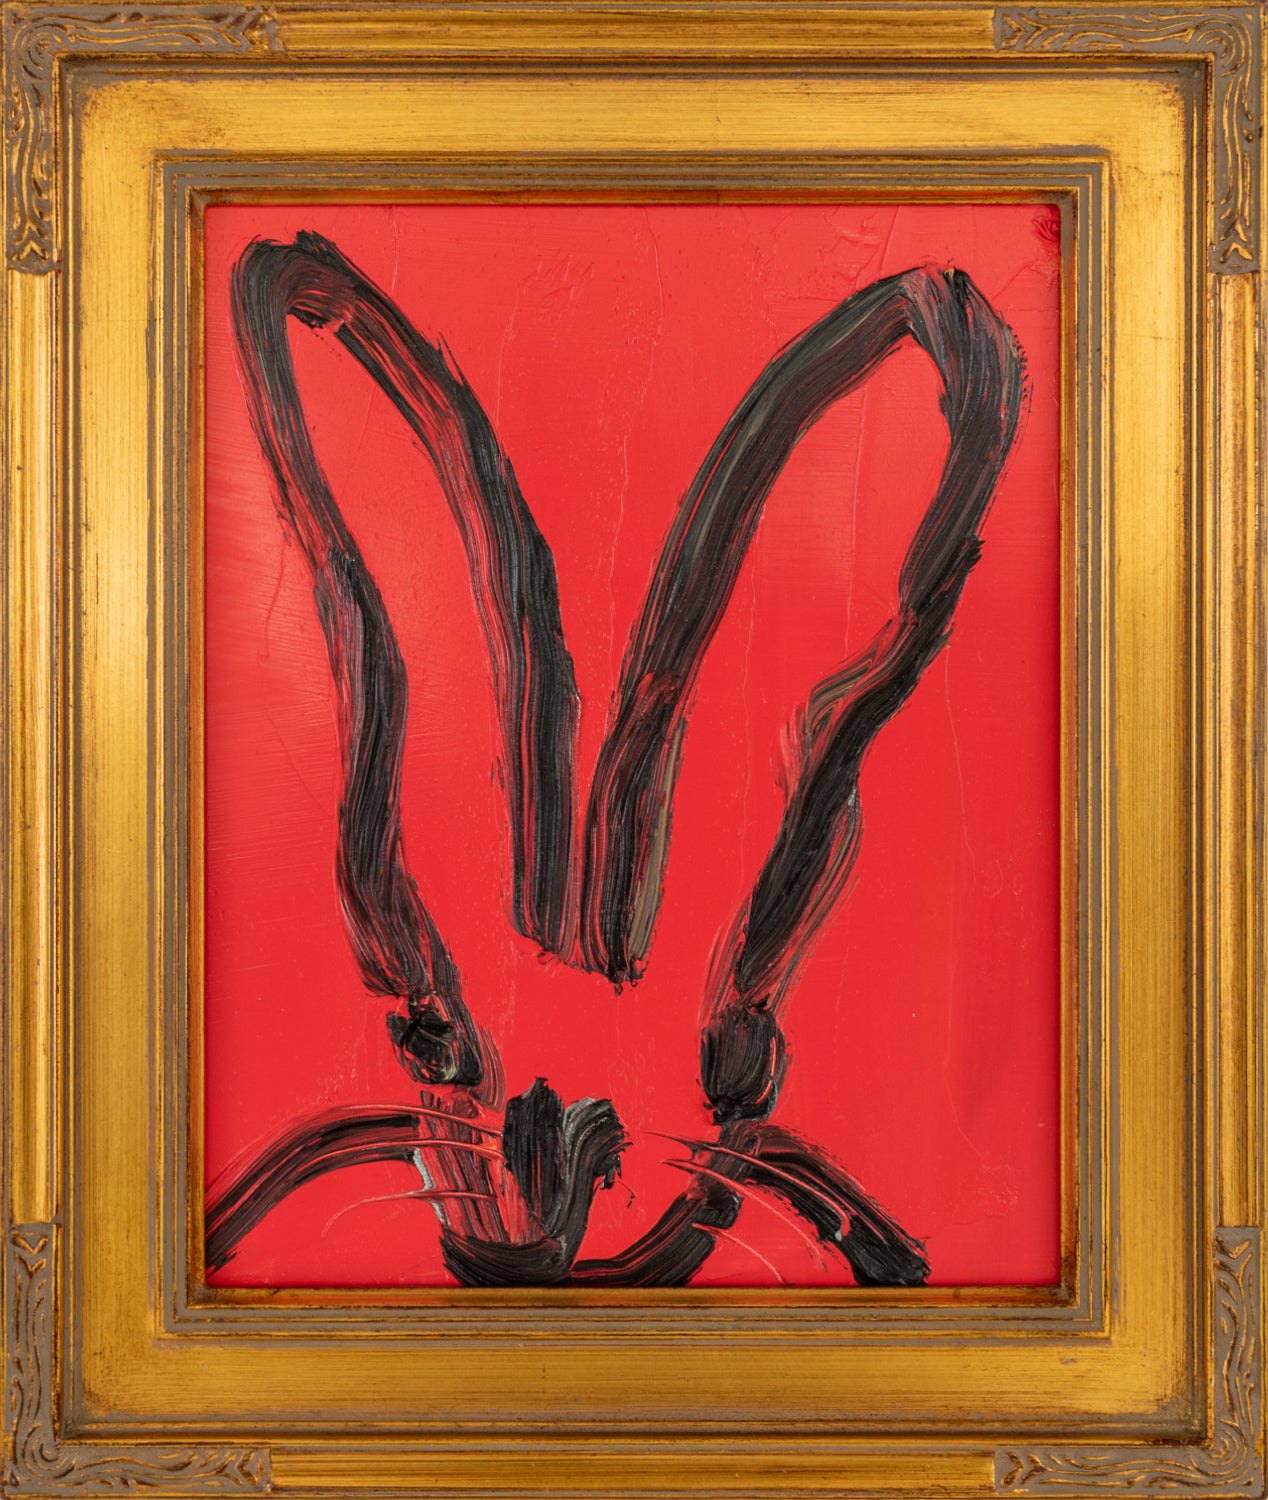 Red Hunt Slonem bunny painting “China Mark,”2021, Oil on wood, 10 x 8 inches, in antique gold frame, Hunt Slonem Bunnies for sale at Manolis Projects Gallery